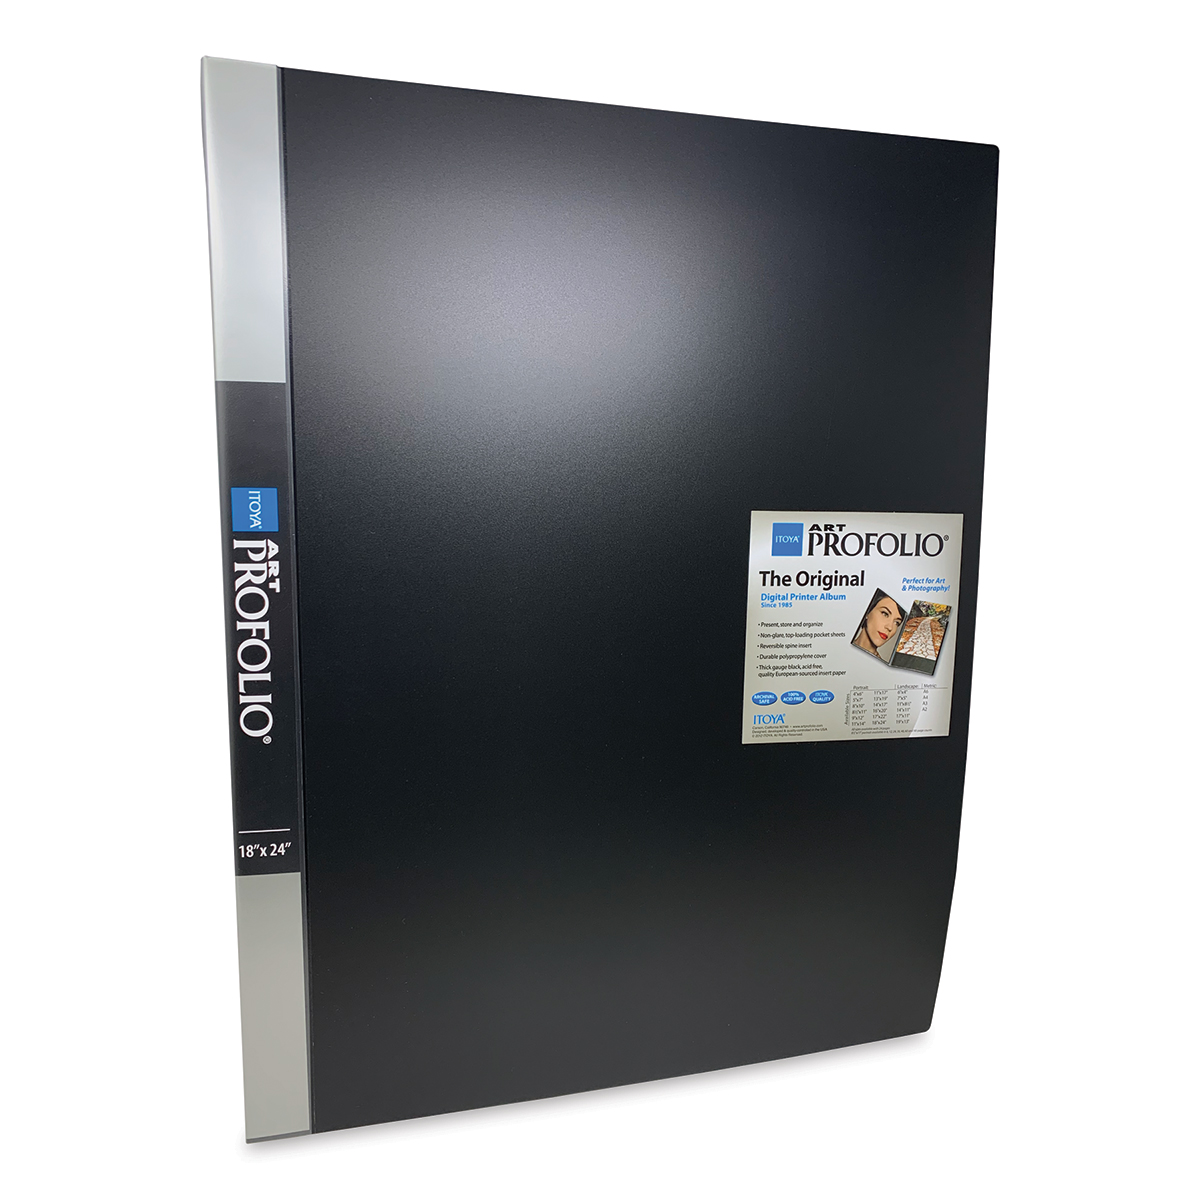 The Art Profolio Multi-Ring 18x24 Refillable Album by Itoya® with